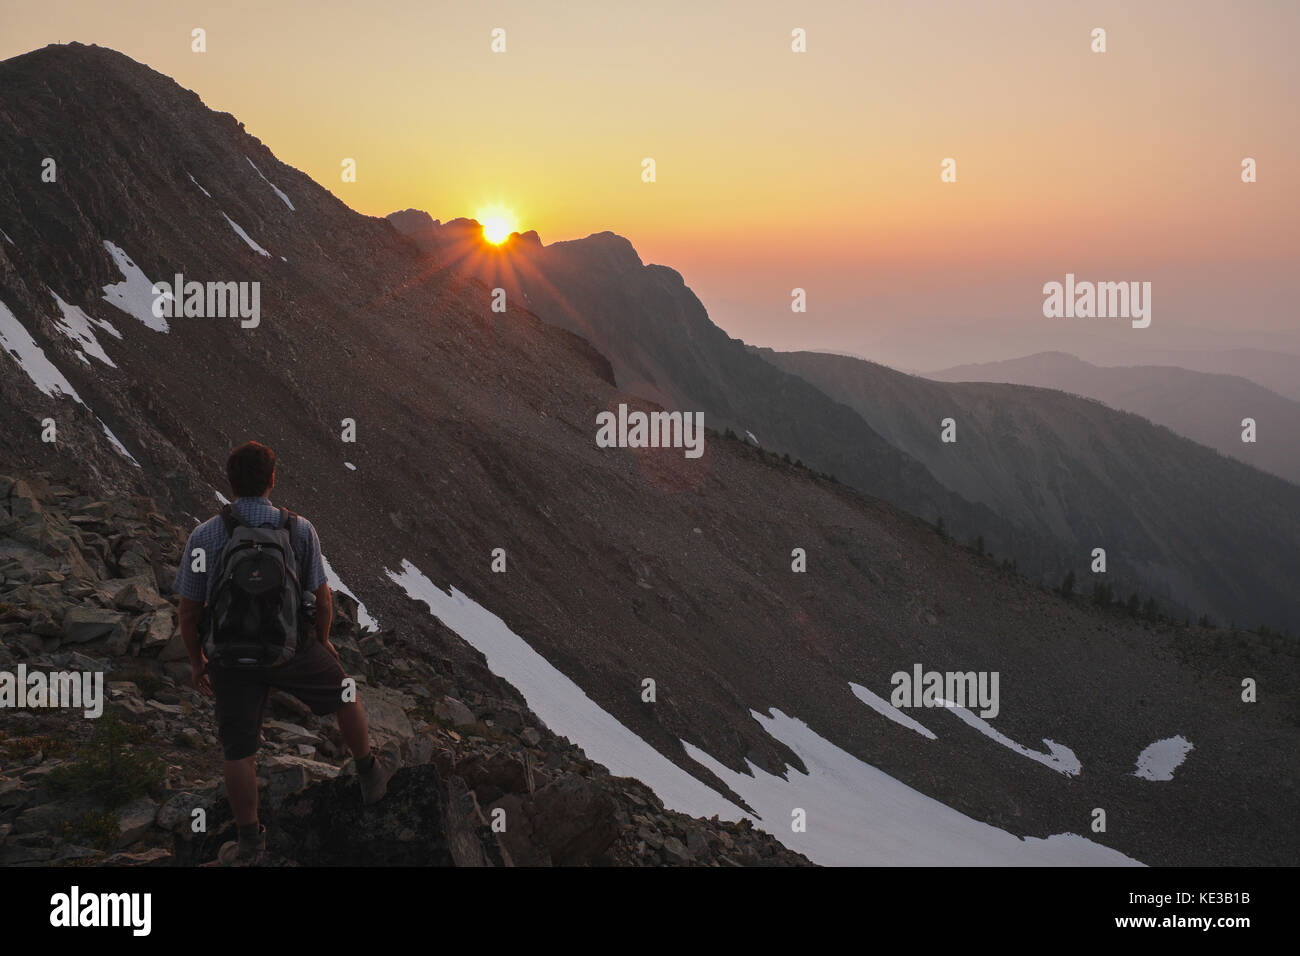 Hiker watching the sunset near the summit of Frosty Mountain in Manning provincial park, British Columbia, Canada. Stock Photo